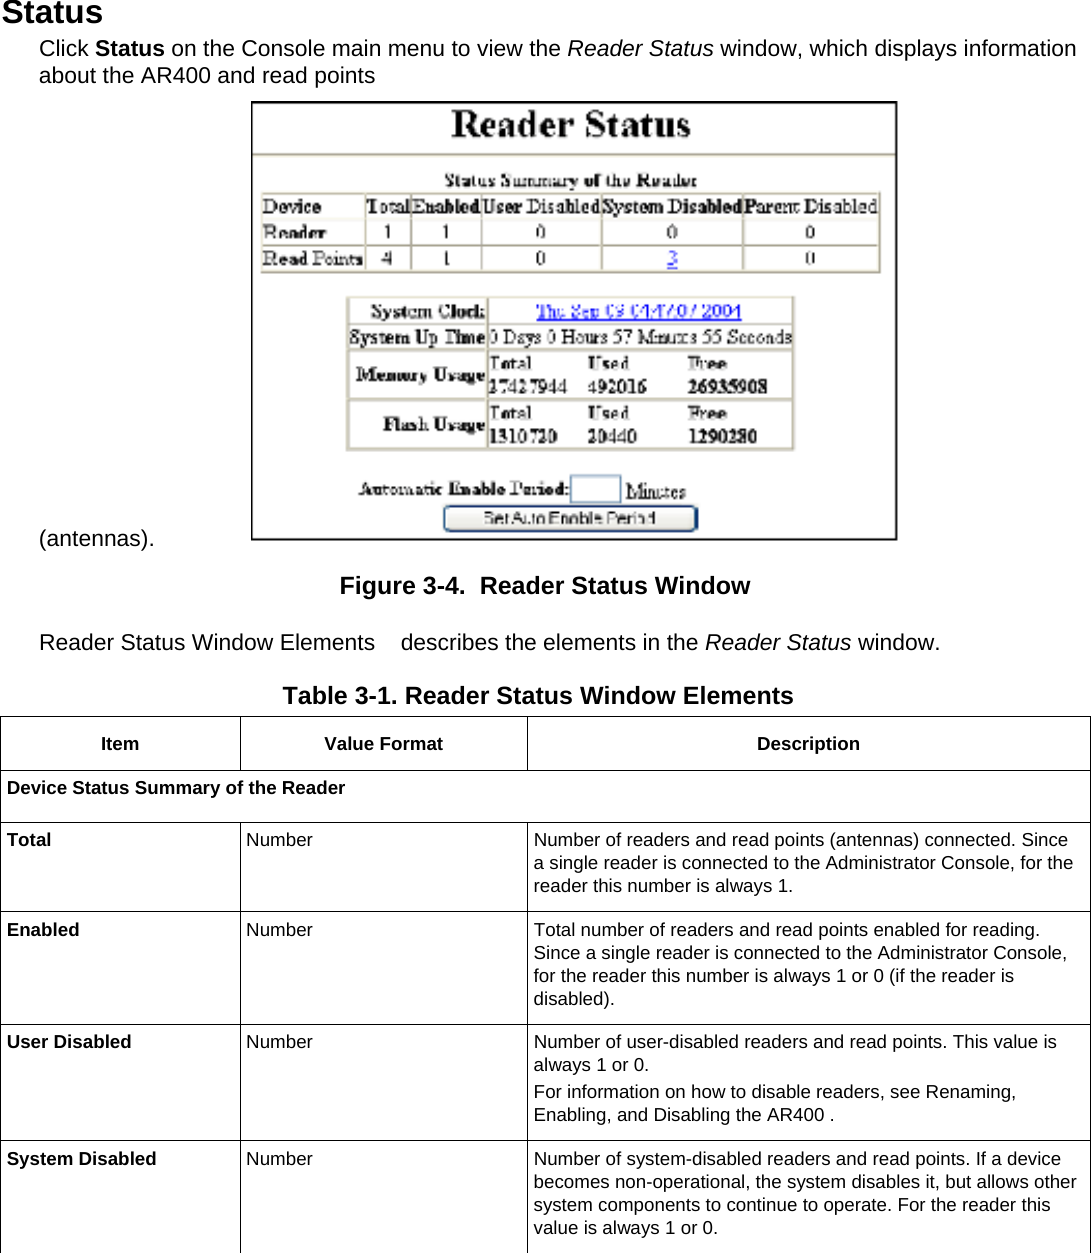  Status Click Status on the Console main menu to view the Reader Status window, which displays information about the AR400 and read points (antennas).  Figure 3-4.  Reader Status Window Reader Status Window Elements    describes the elements in the Reader Status window. Table 3-1. Reader Status Window Elements   Item Value Format  Description Device Status Summary of the Reader Total  Number  Number of readers and read points (antennas) connected. Since a single reader is connected to the Administrator Console, for the reader this number is always 1. Enabled  Number  Total number of readers and read points enabled for reading. Since a single reader is connected to the Administrator Console, for the reader this number is always 1 or 0 (if the reader is disabled). User Disabled  Number  Number of user-disabled readers and read points. This value is always 1 or 0. For information on how to disable readers, see Renaming, Enabling, and Disabling the AR400 .  System Disabled   Number  Number of system-disabled readers and read points. If a device becomes non-operational, the system disables it, but allows other system components to continue to operate. For the reader this value is always 1 or 0. 